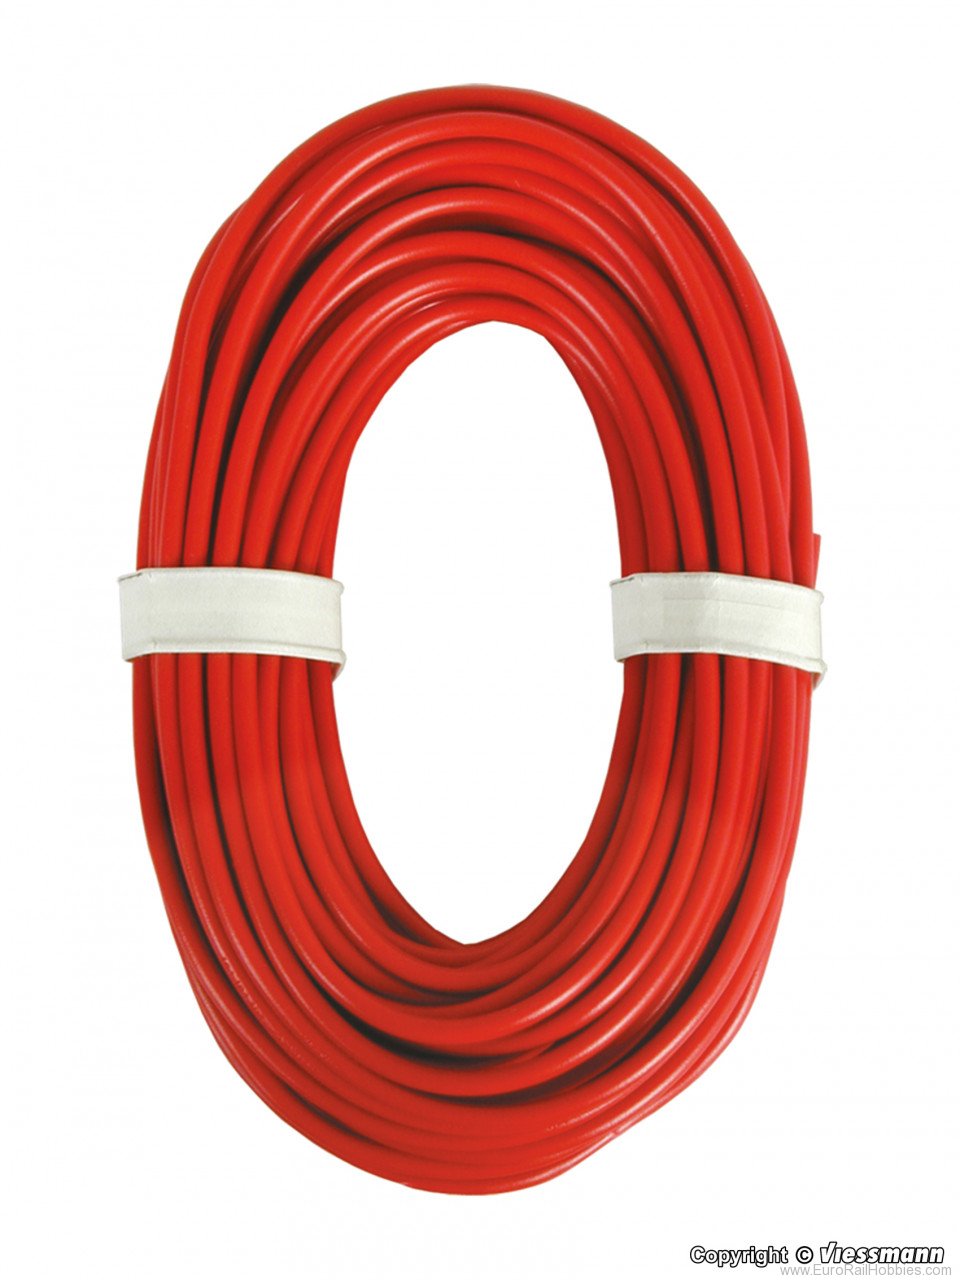 Viessmann 6895 High-current cable, 0,75 mm dia., red, 10 m